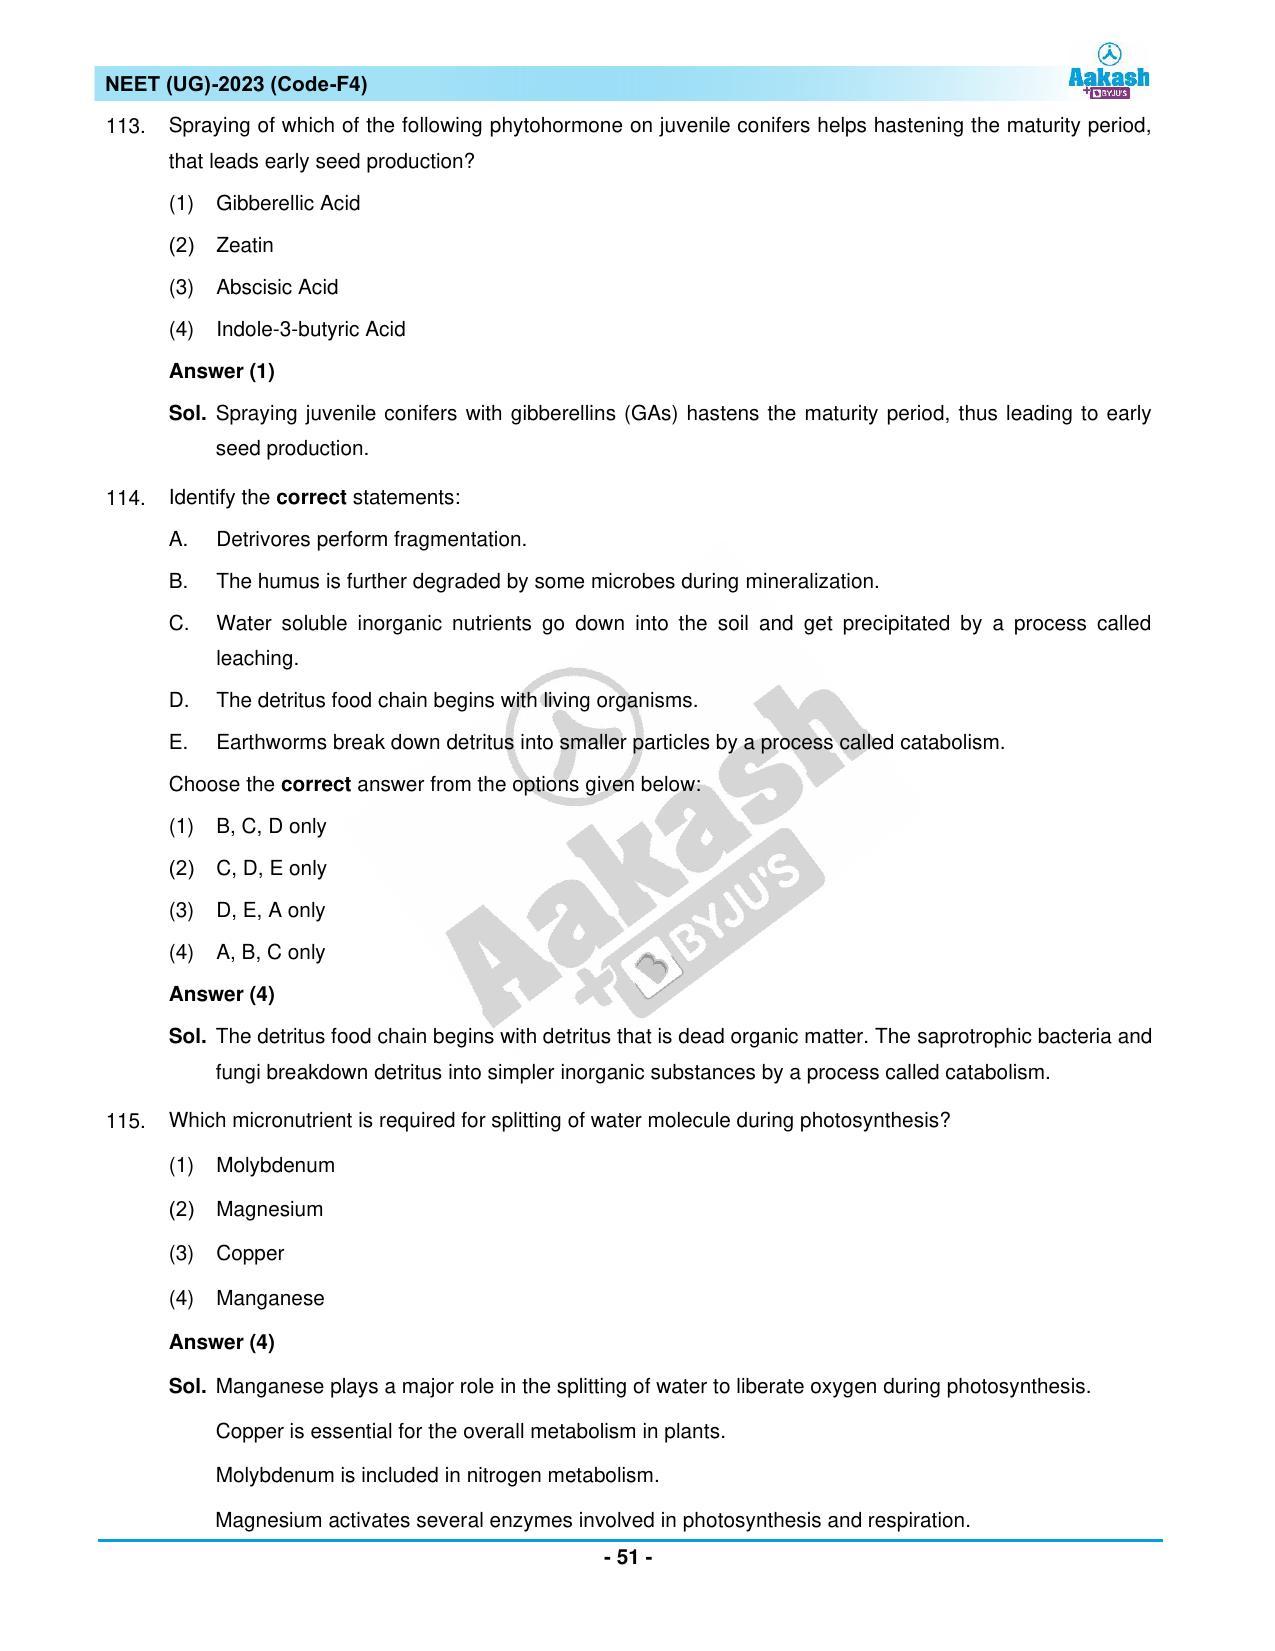 NEET 2023 Question Paper F4 - Page 51